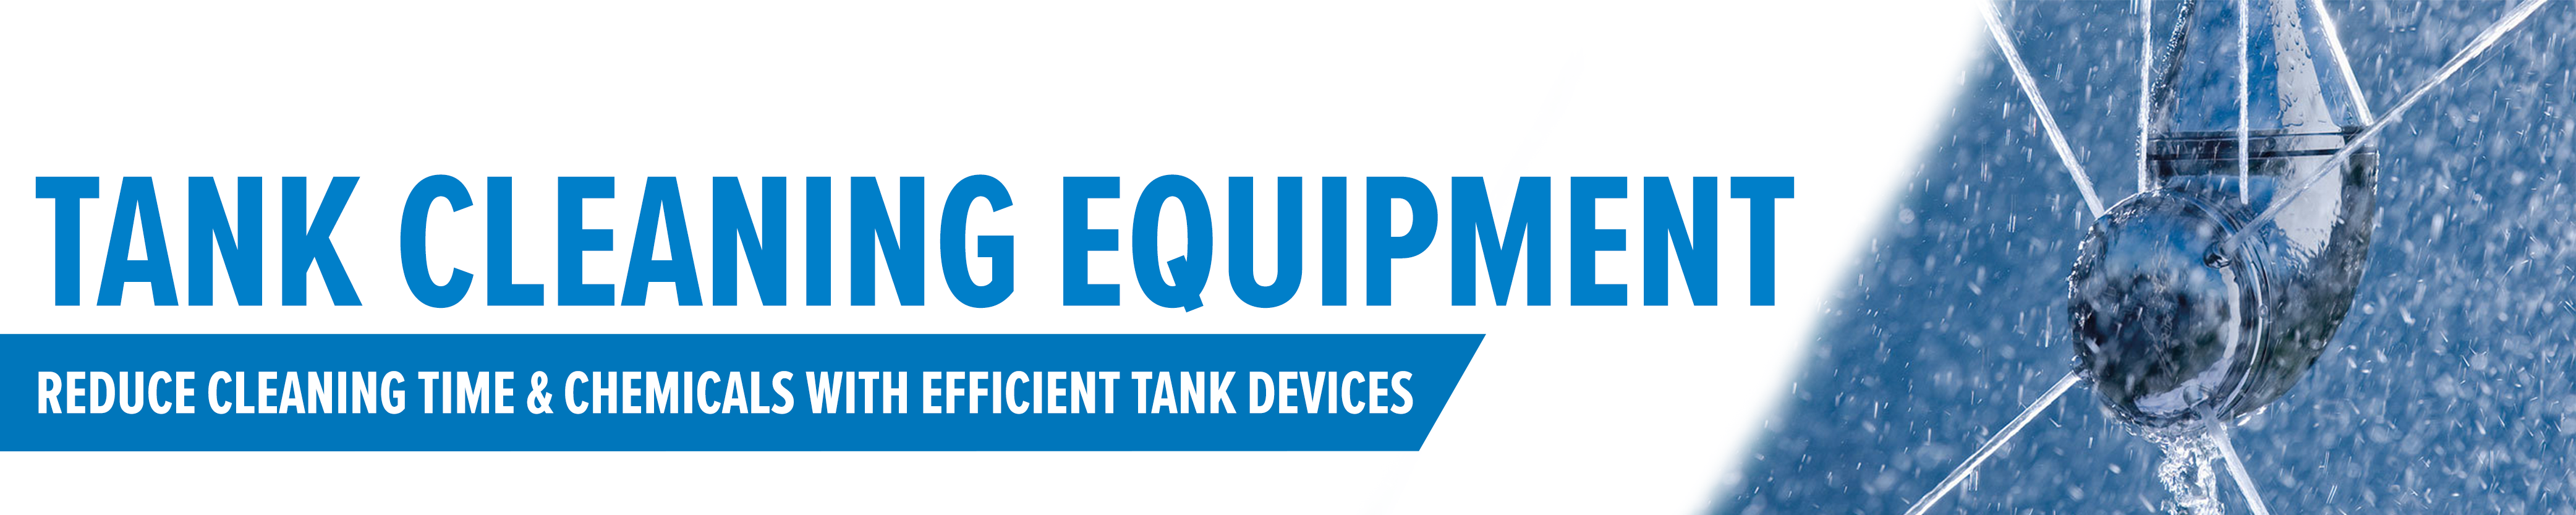 Tank Cleaning Equipment - Reduce cleaning time and chemicals with efficient tank devices